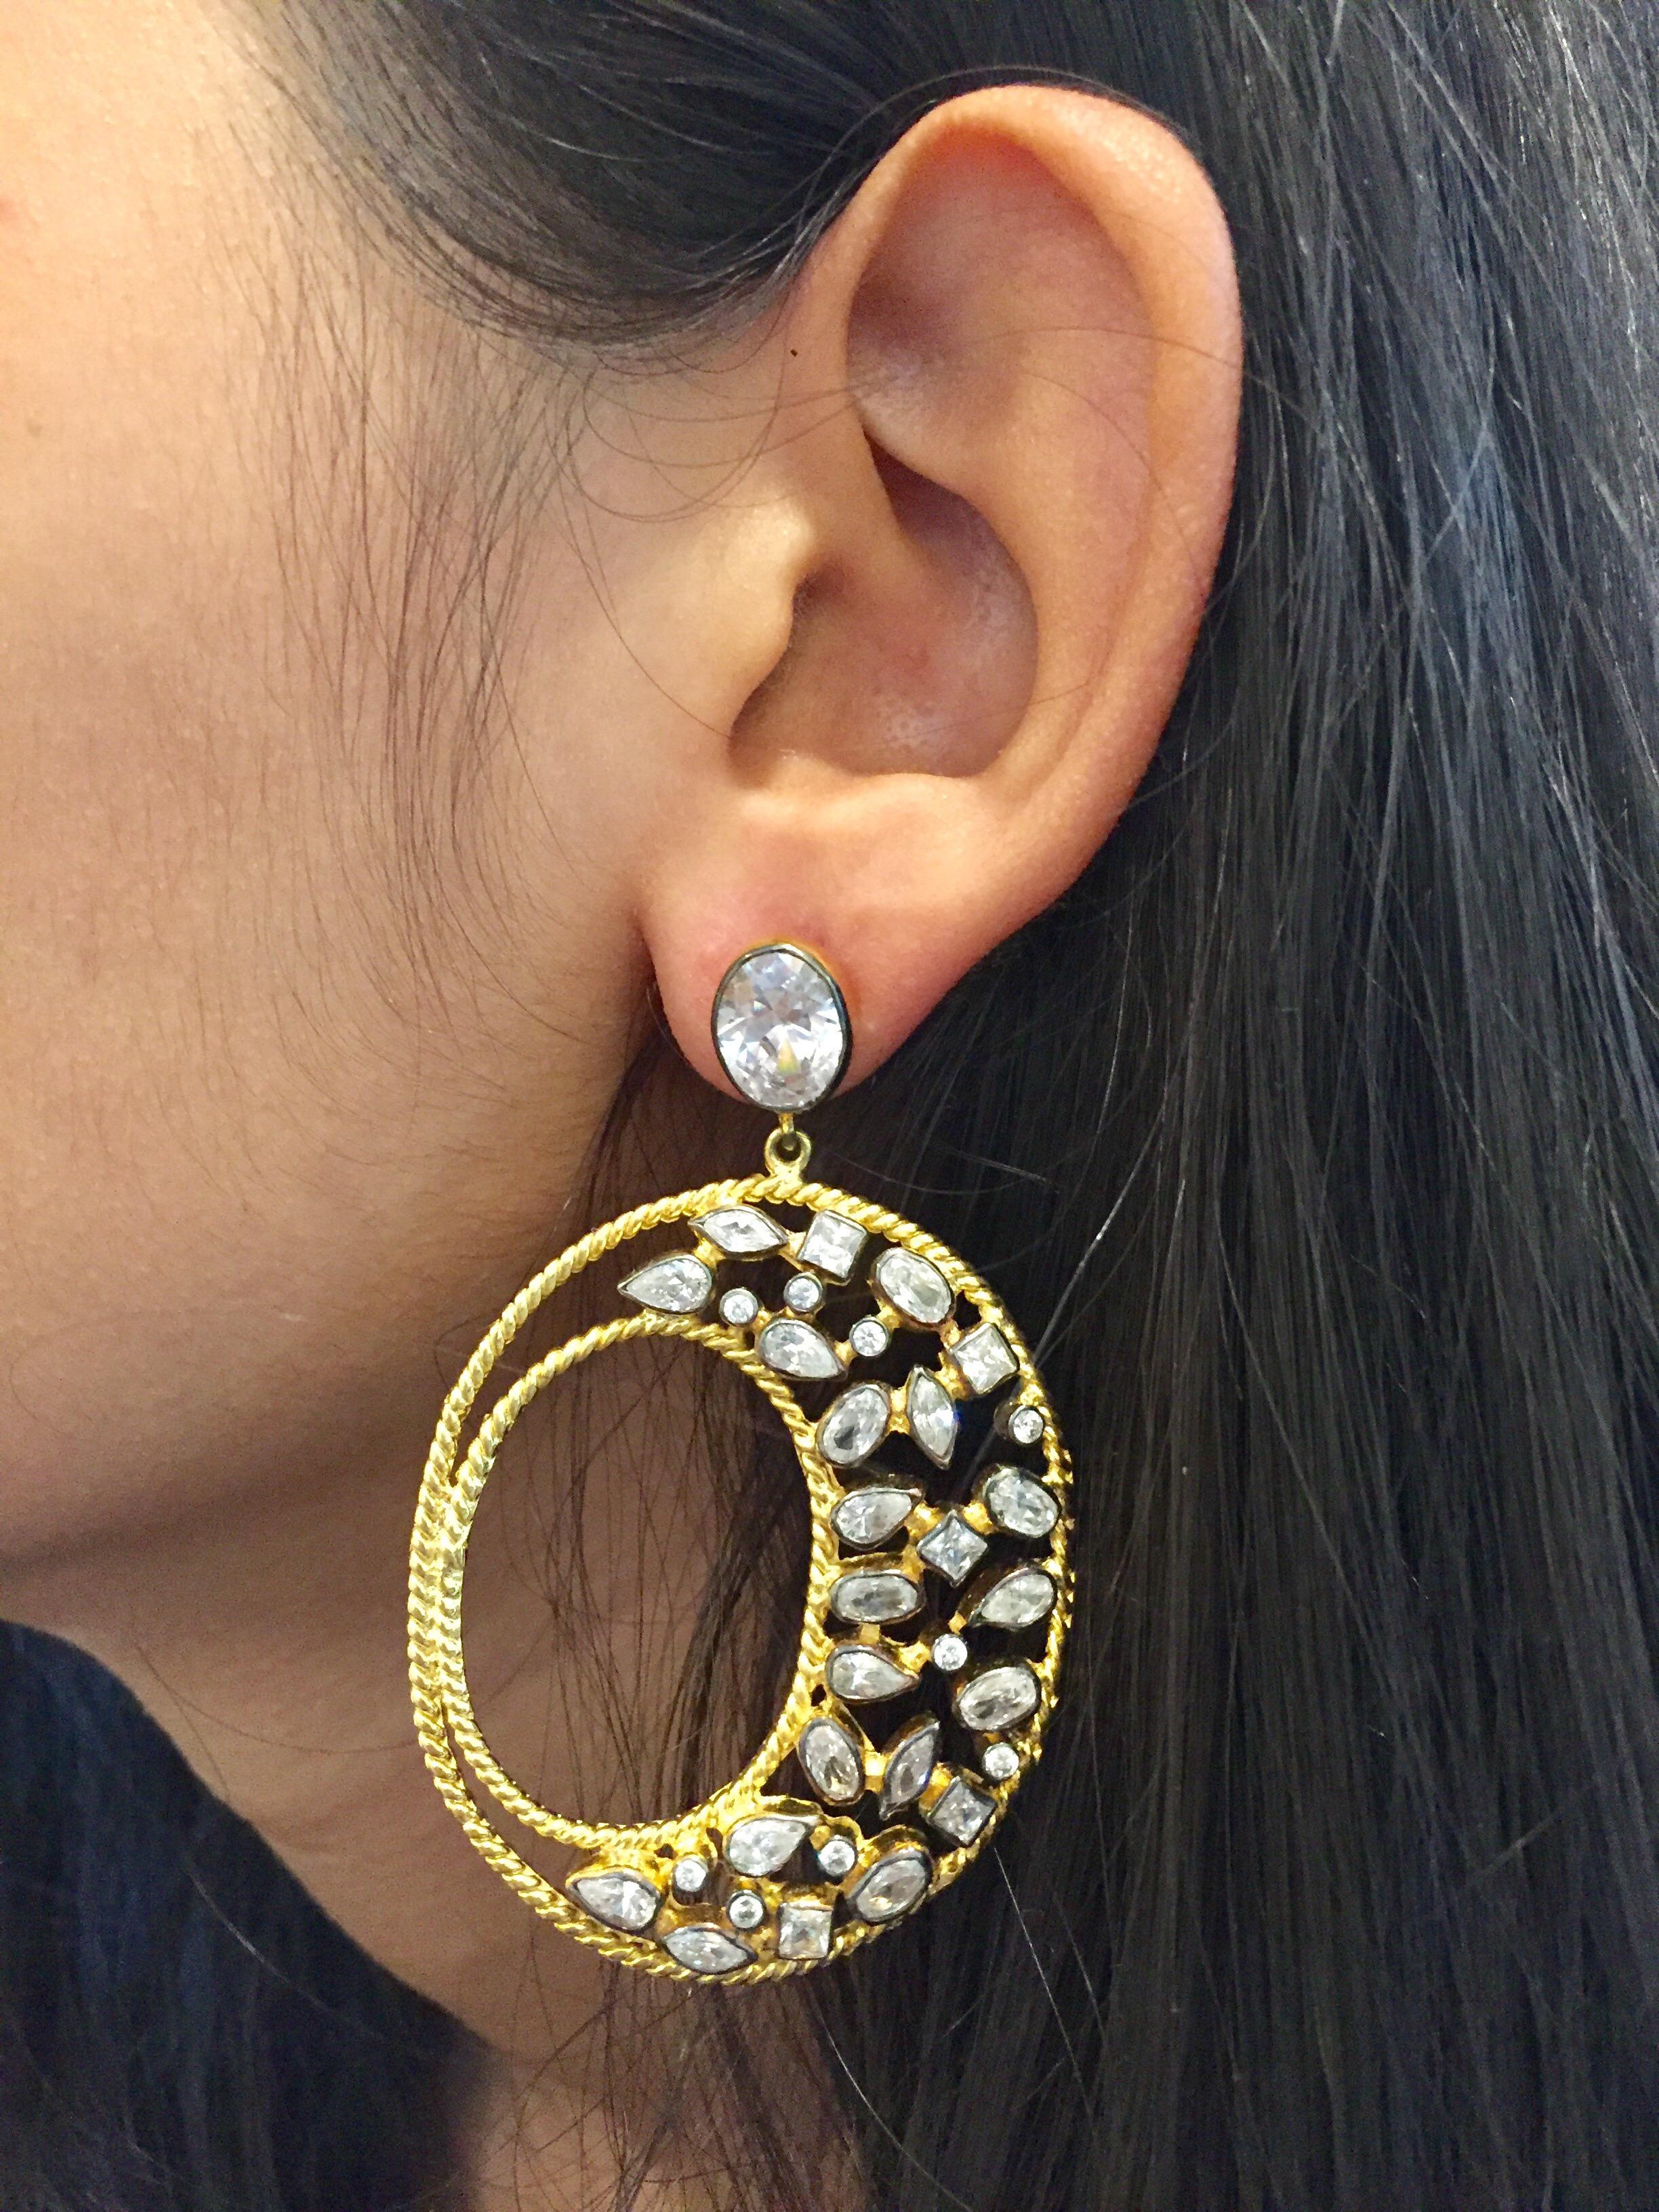 This gorgeous gold and CZ Diva hoop earrings are the ultimate in exotic glamor. With twisted gold wire forming the outline, the field of generously scattered CZ stones delivers unmatched sparkle. These large earrings are versatile enough to